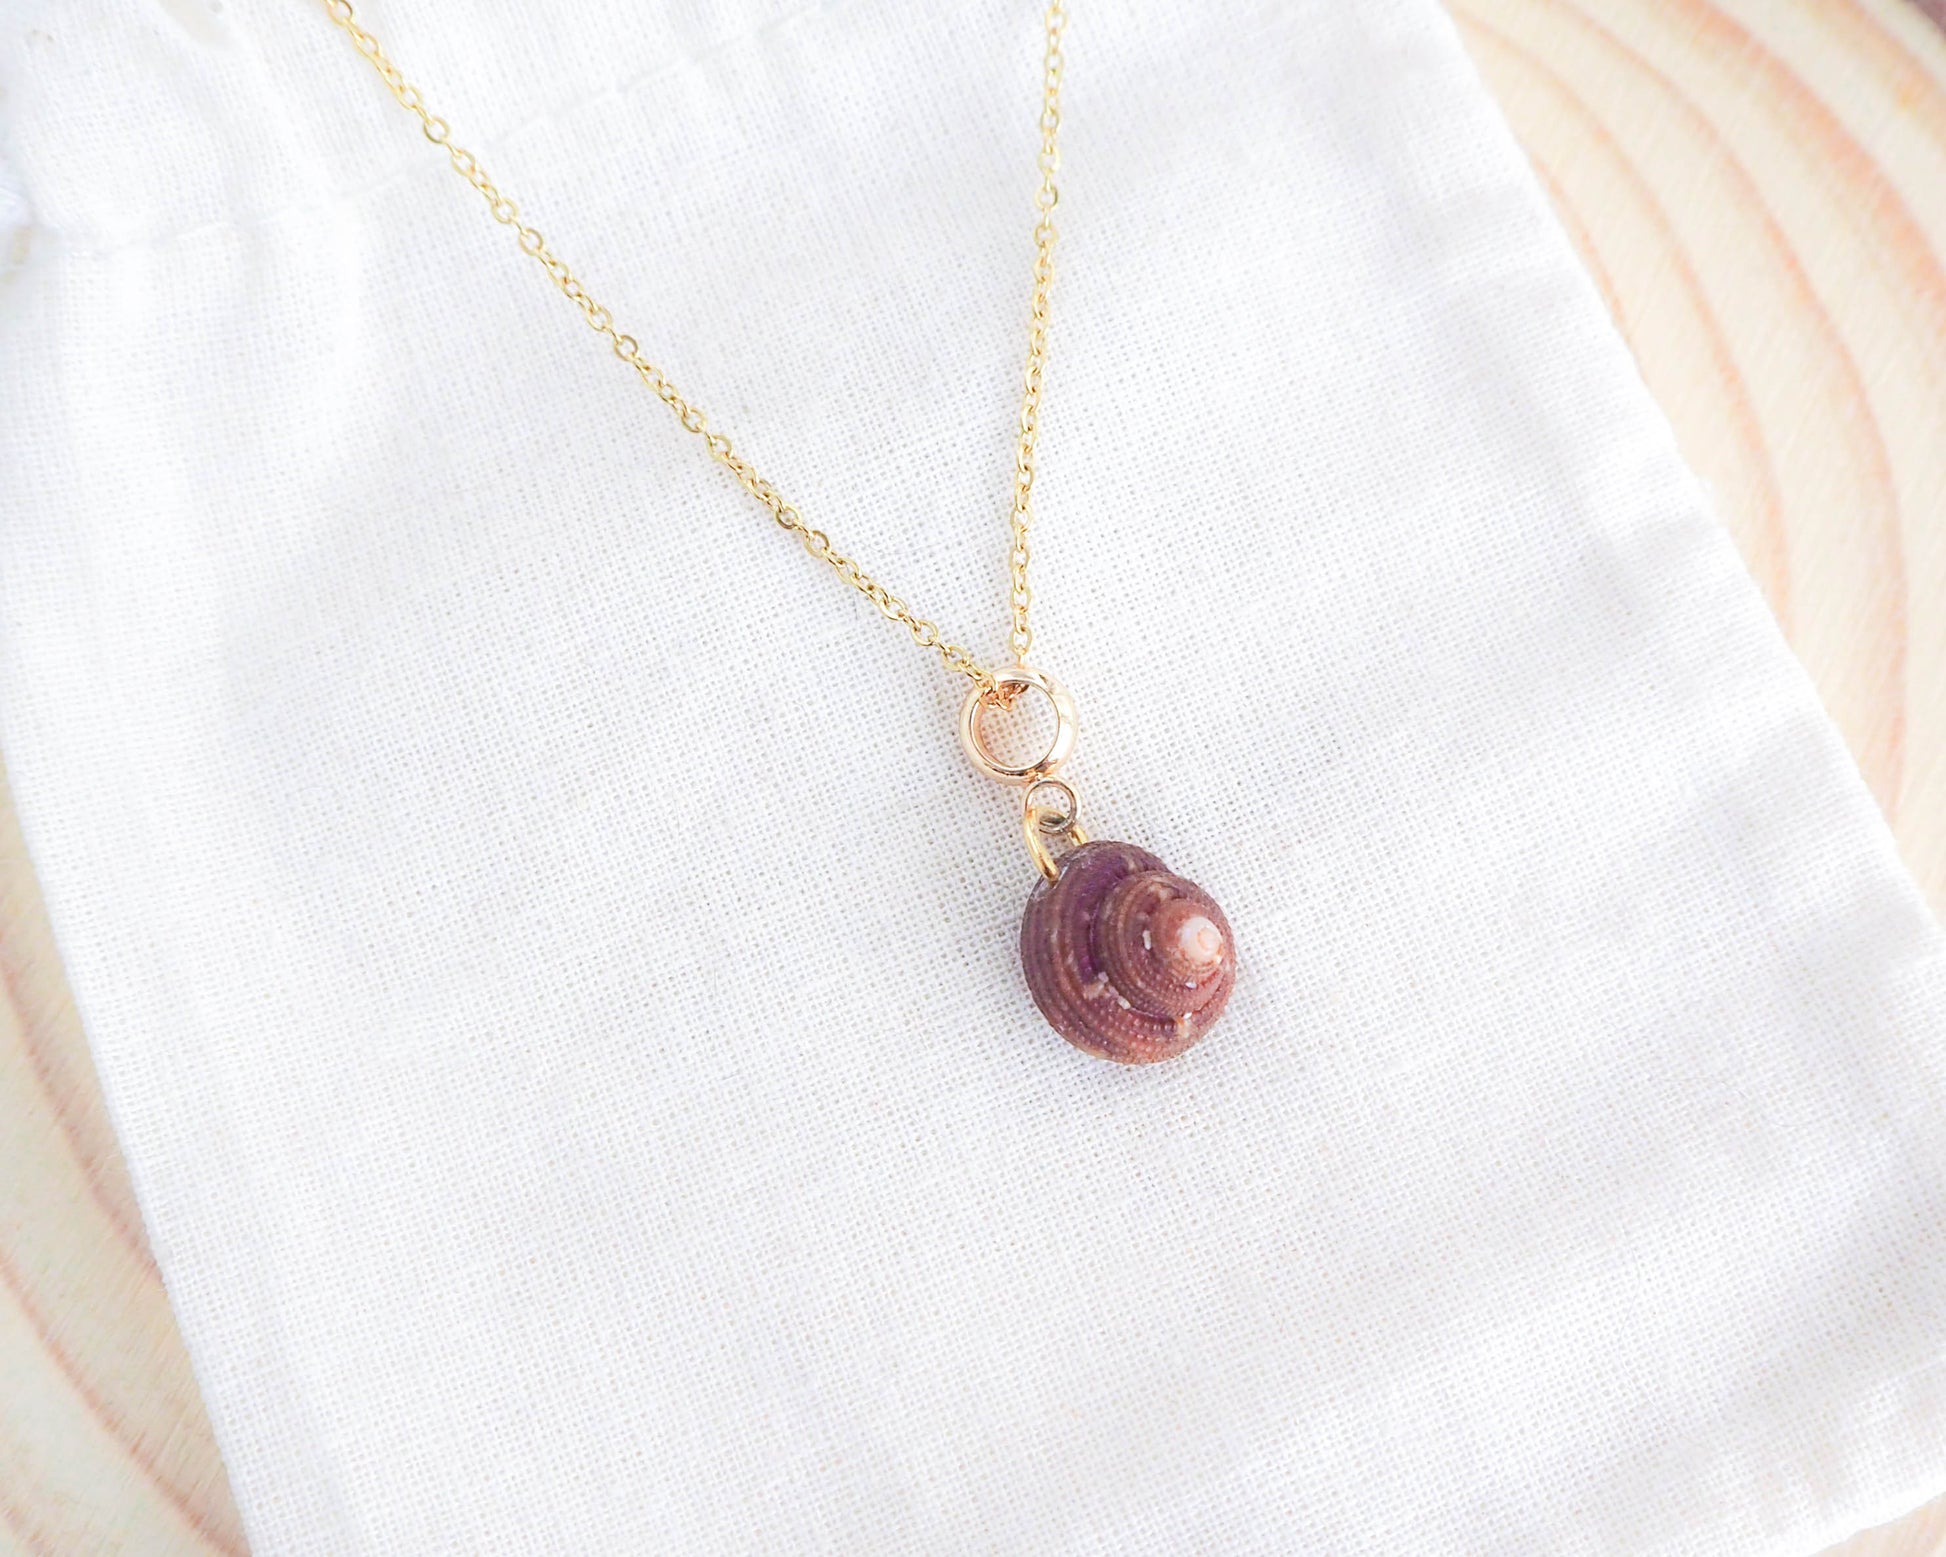 Real Shell Necklace with Bordeaux Top Shell from Algarve